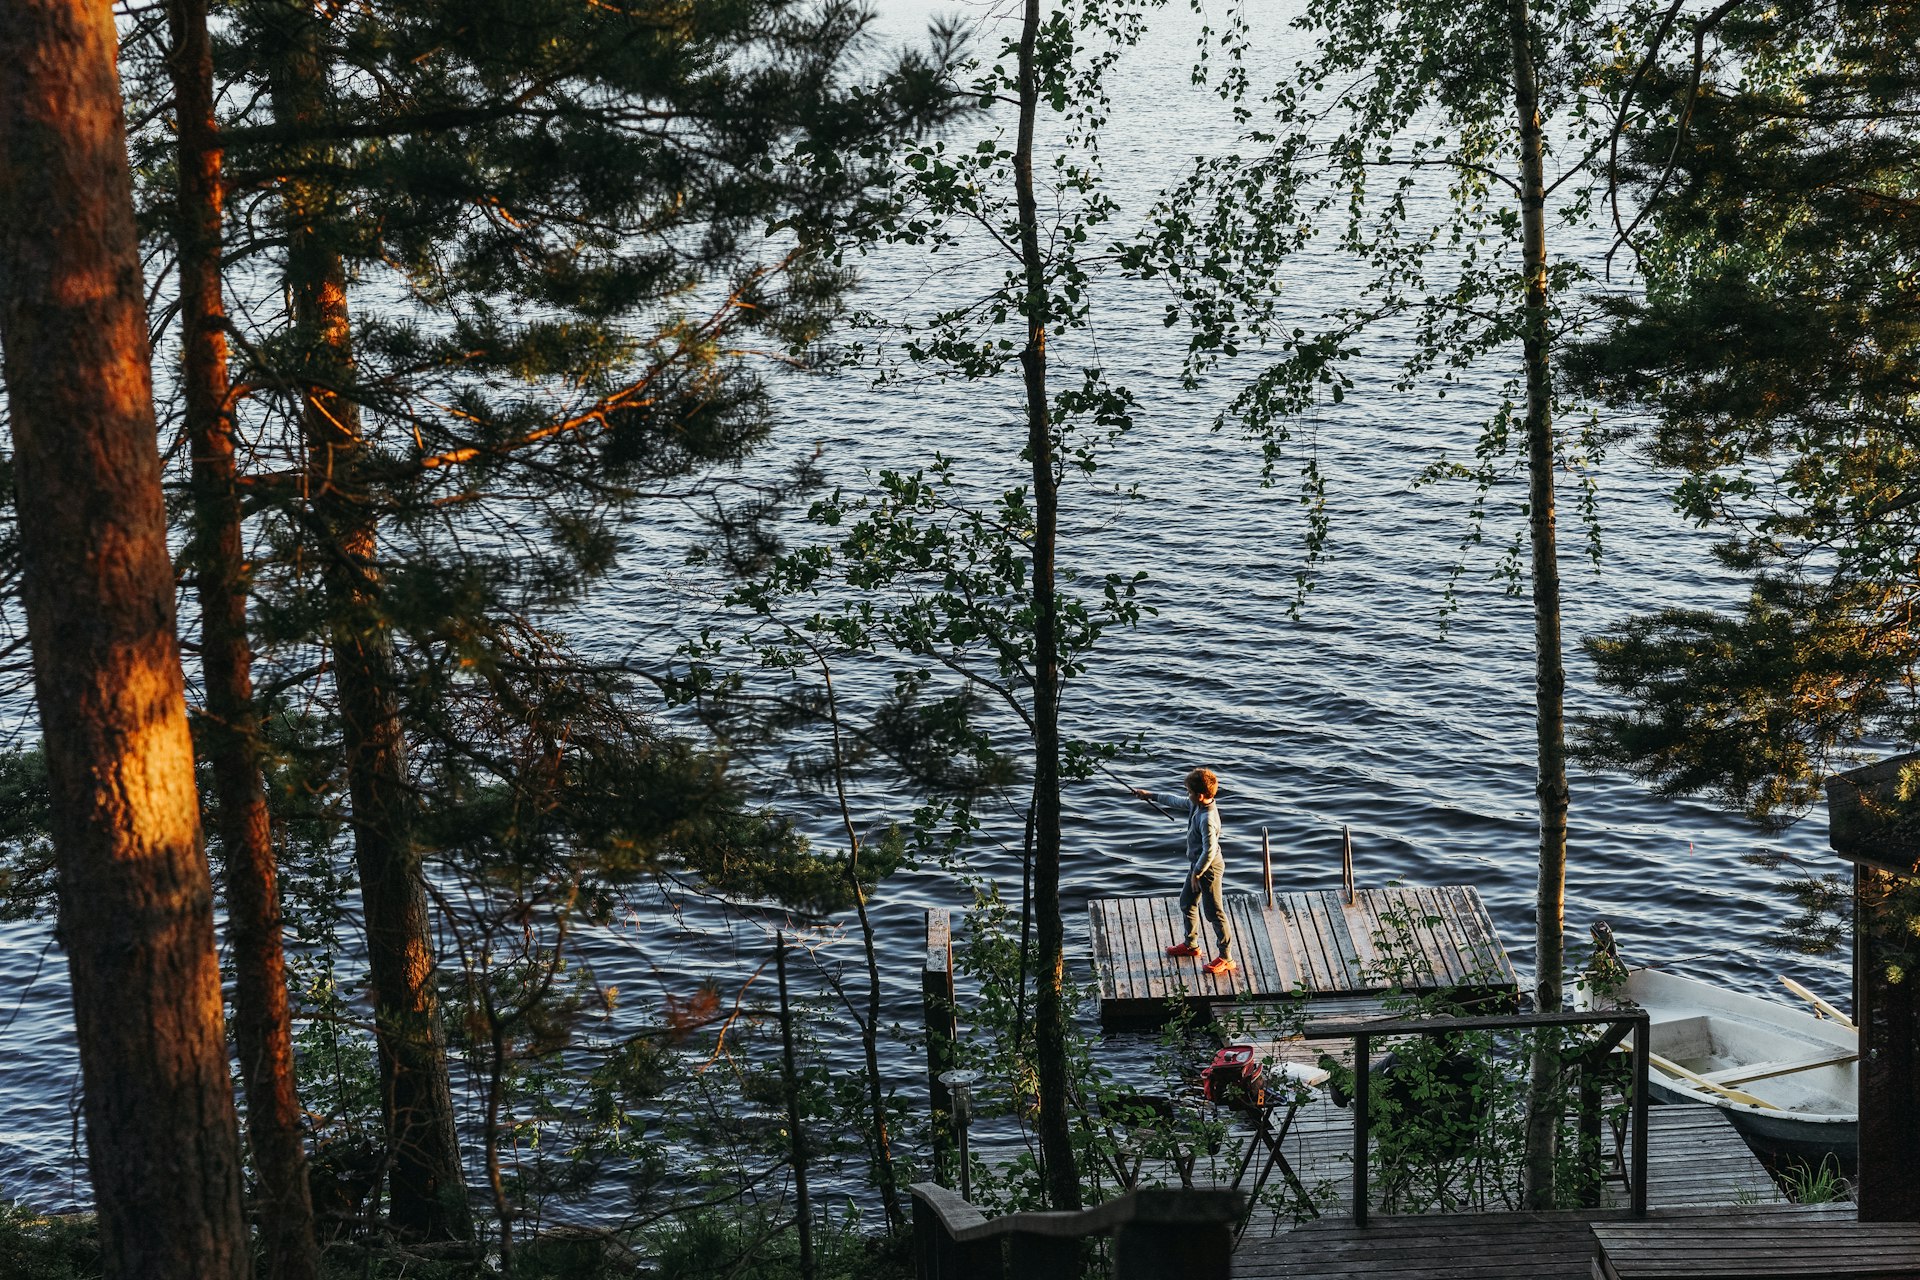 A young boy is fishing on a wooden pier by a lake in a forest, Finland